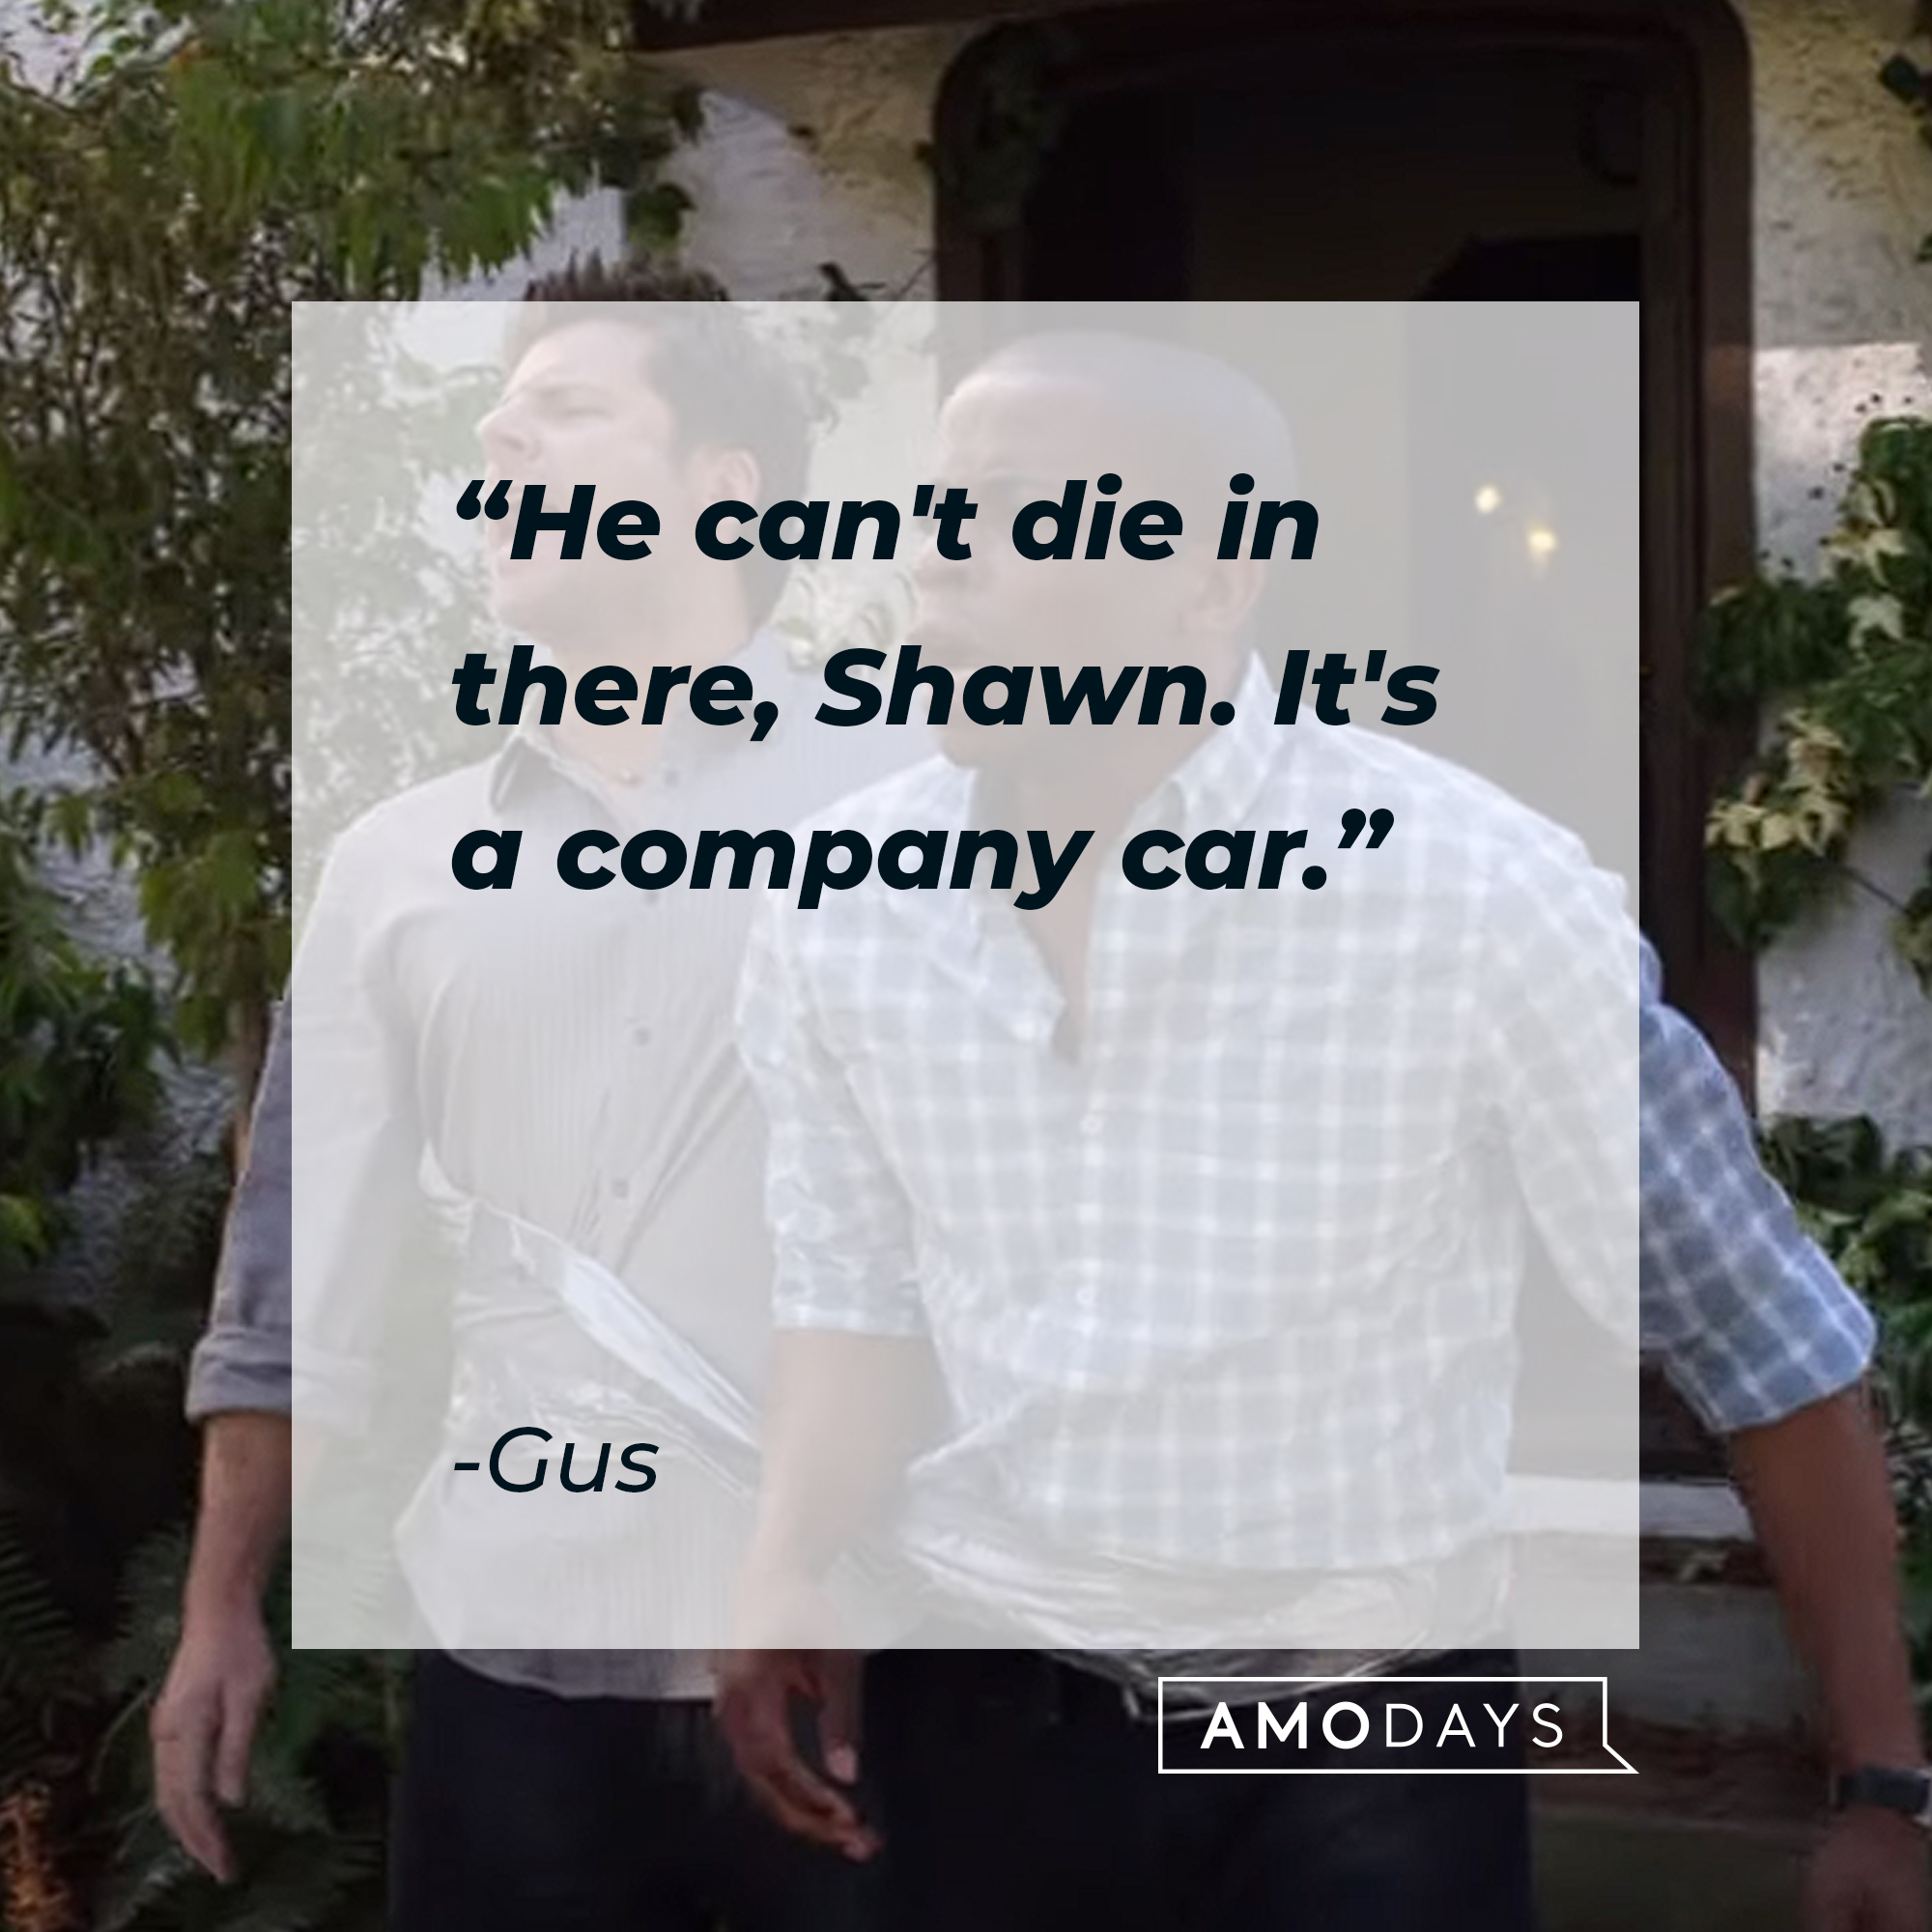 Gus' quote: "He can't die in there, Shawn. It's a company car." | Source: youtube.com/Psych